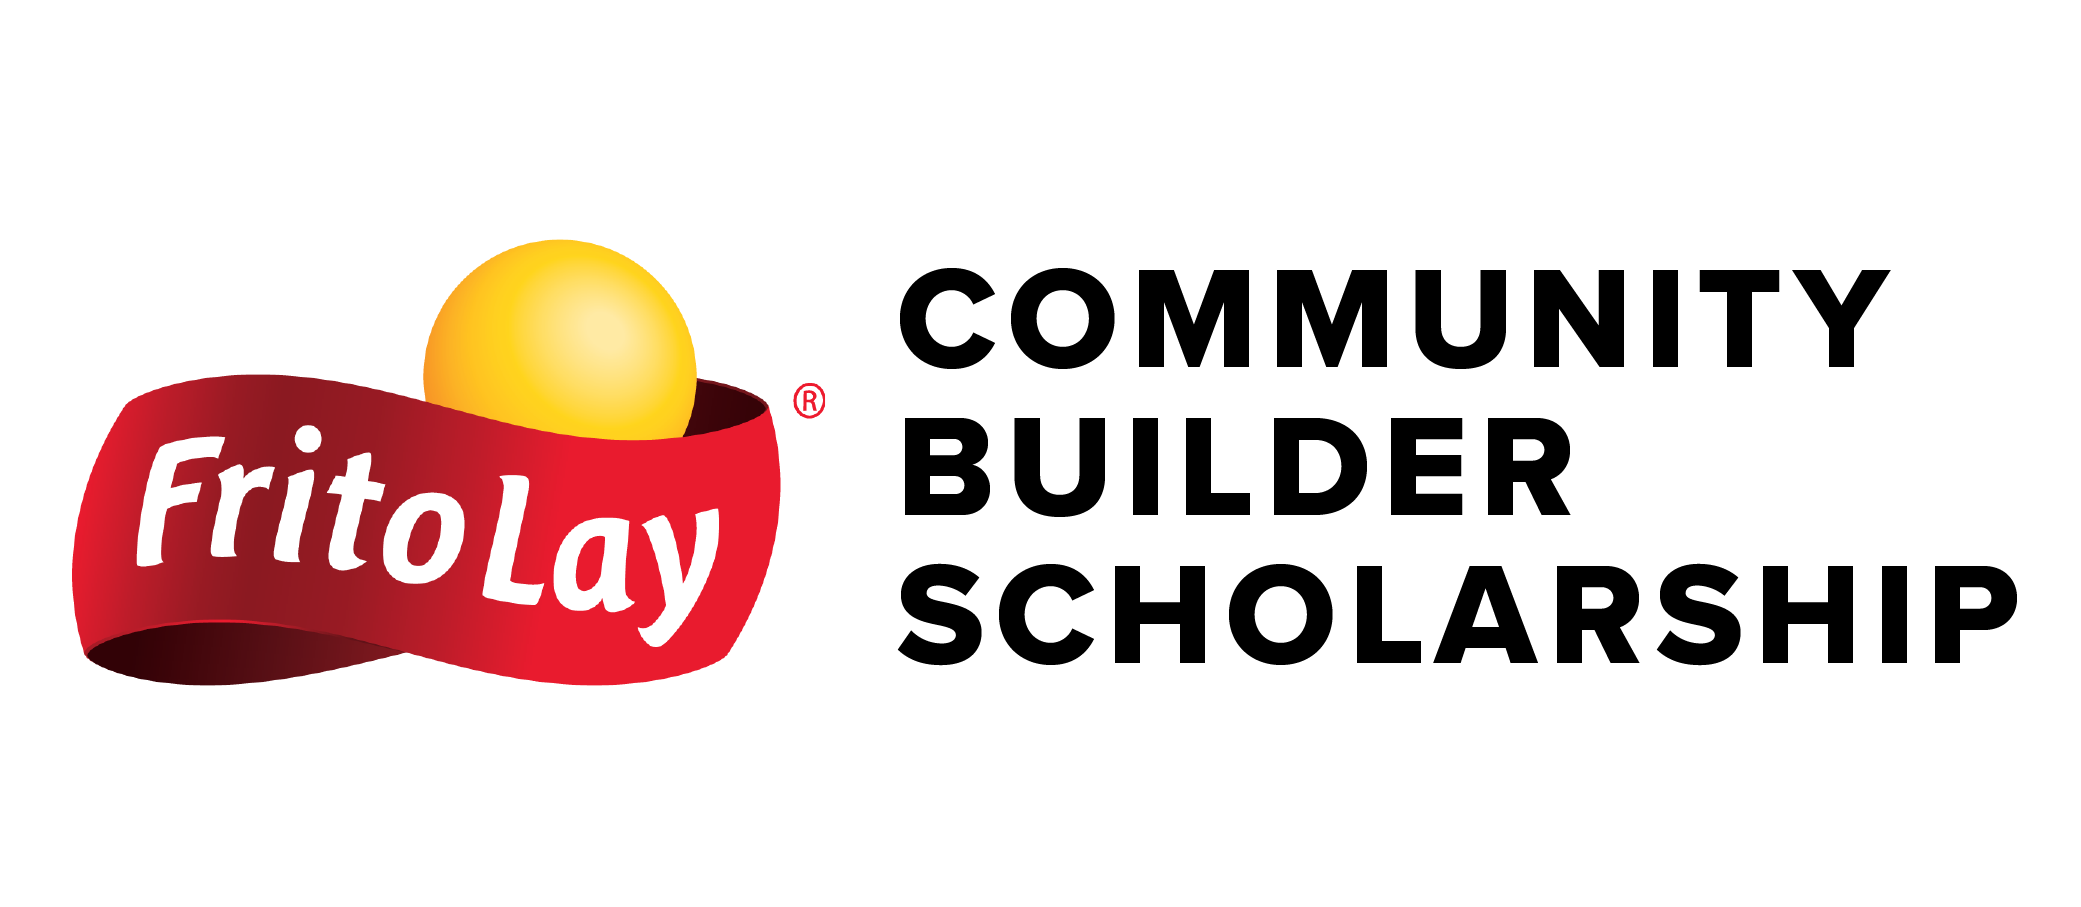 College Press Releases Frito-Lay Opens New Scholarship for College Students to Celebrate Community Builders